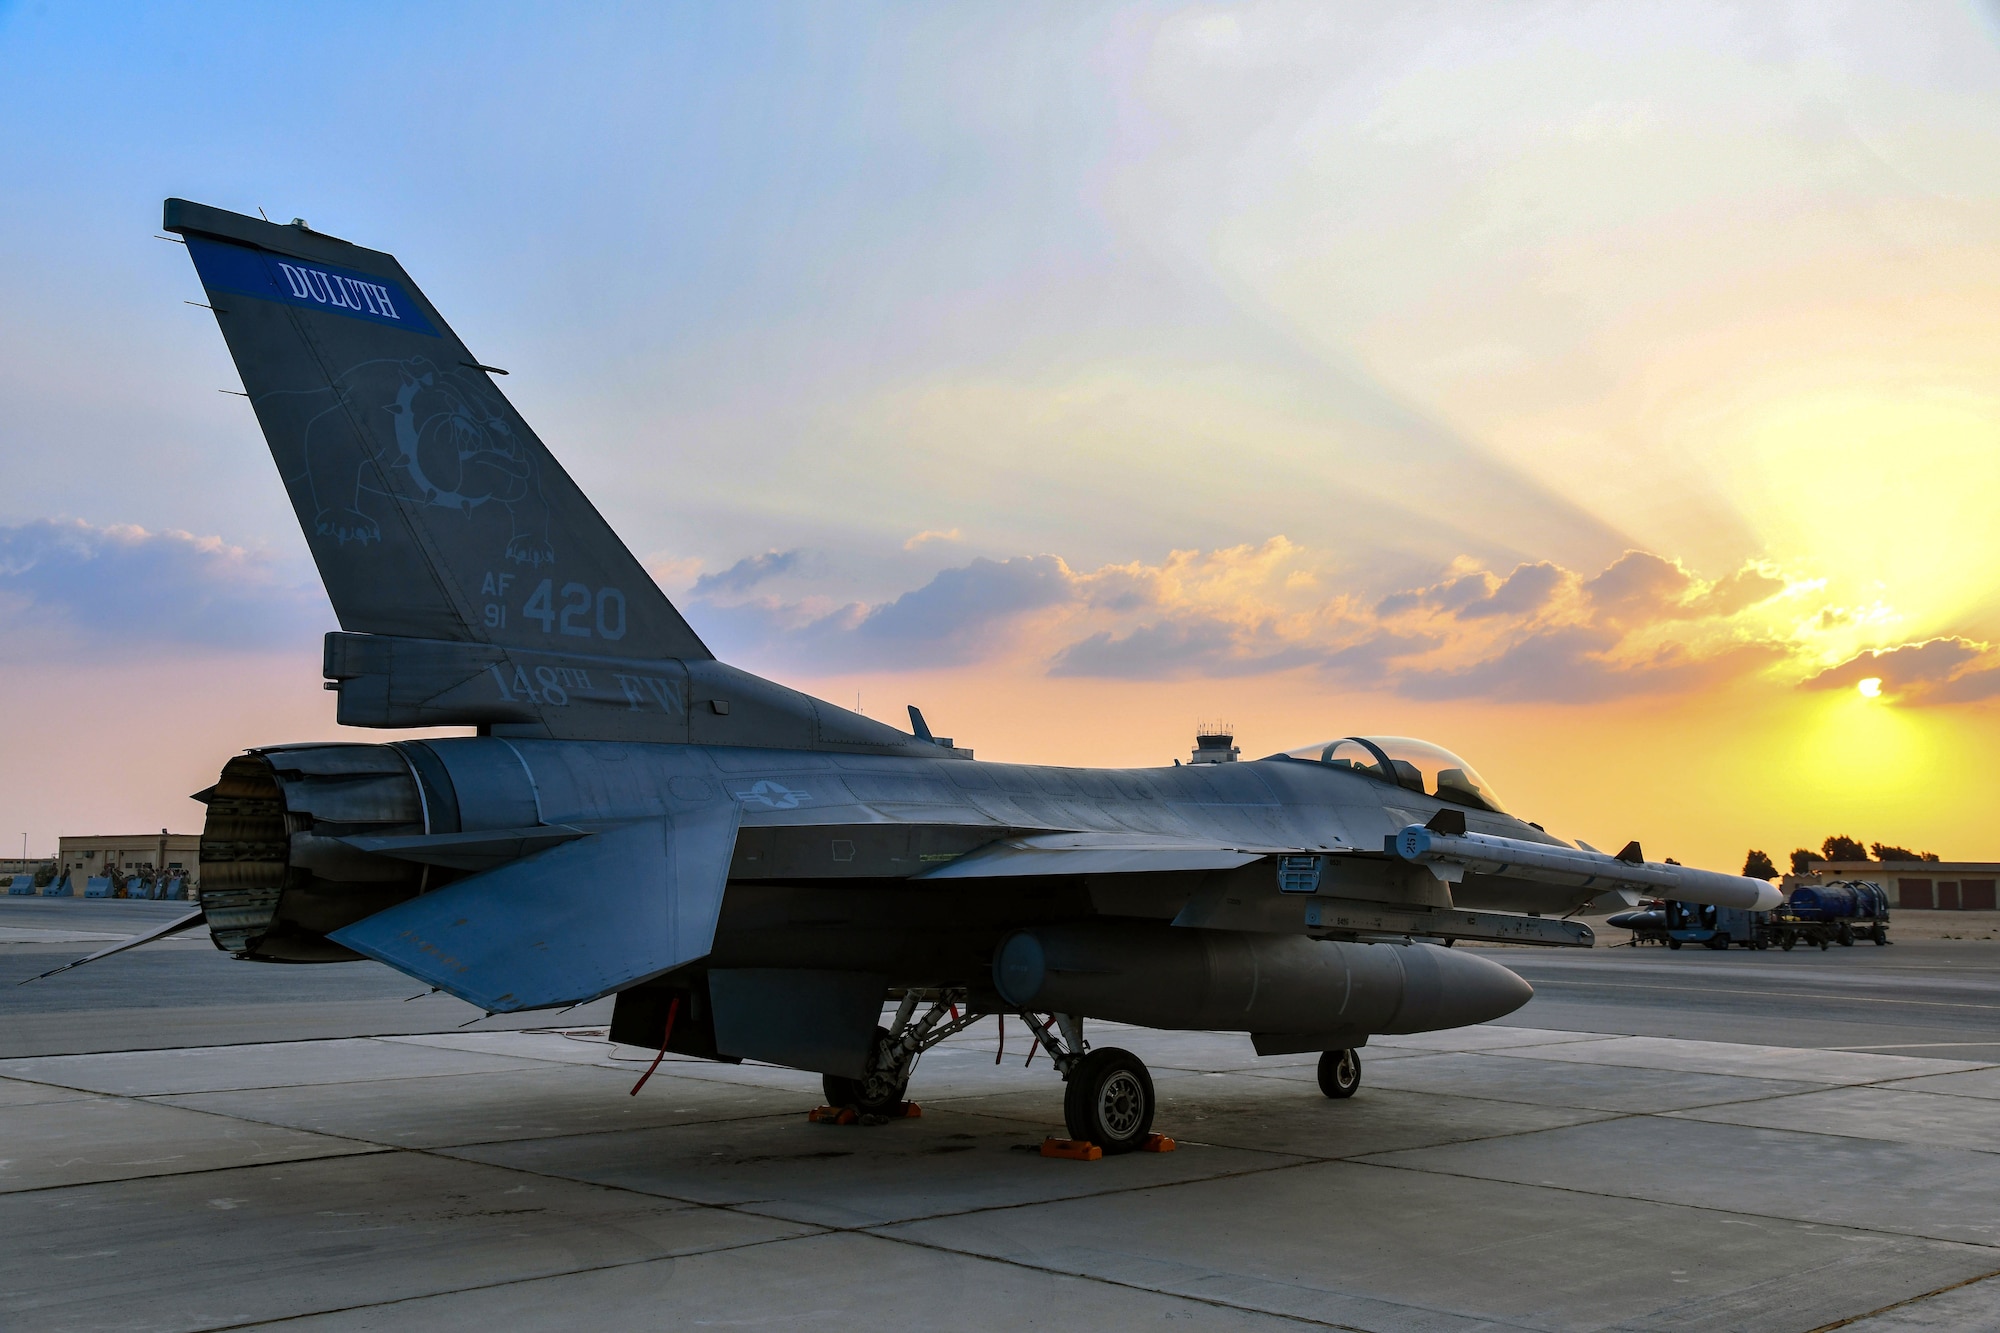 An F-16 Fighting Falcon from the 179th Expeditionary Fighter Squadron, 378th Air Expeditionary Wing, Prince Sultan Air Base, Saudi Arabia, rests on the ramp